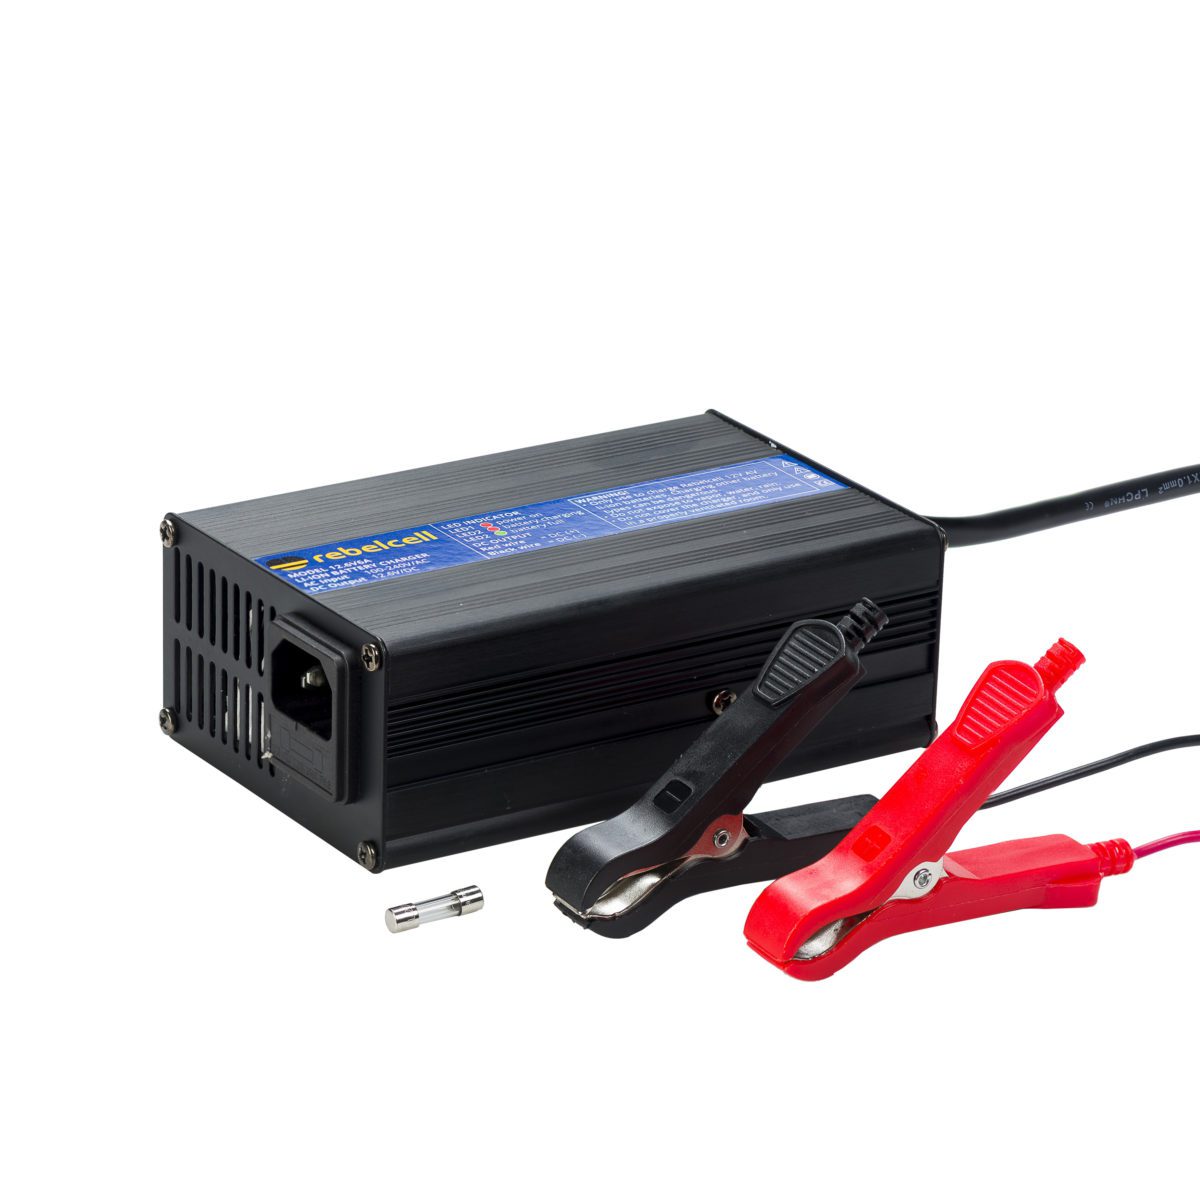 Rebelcell charger 12.6V6A product image